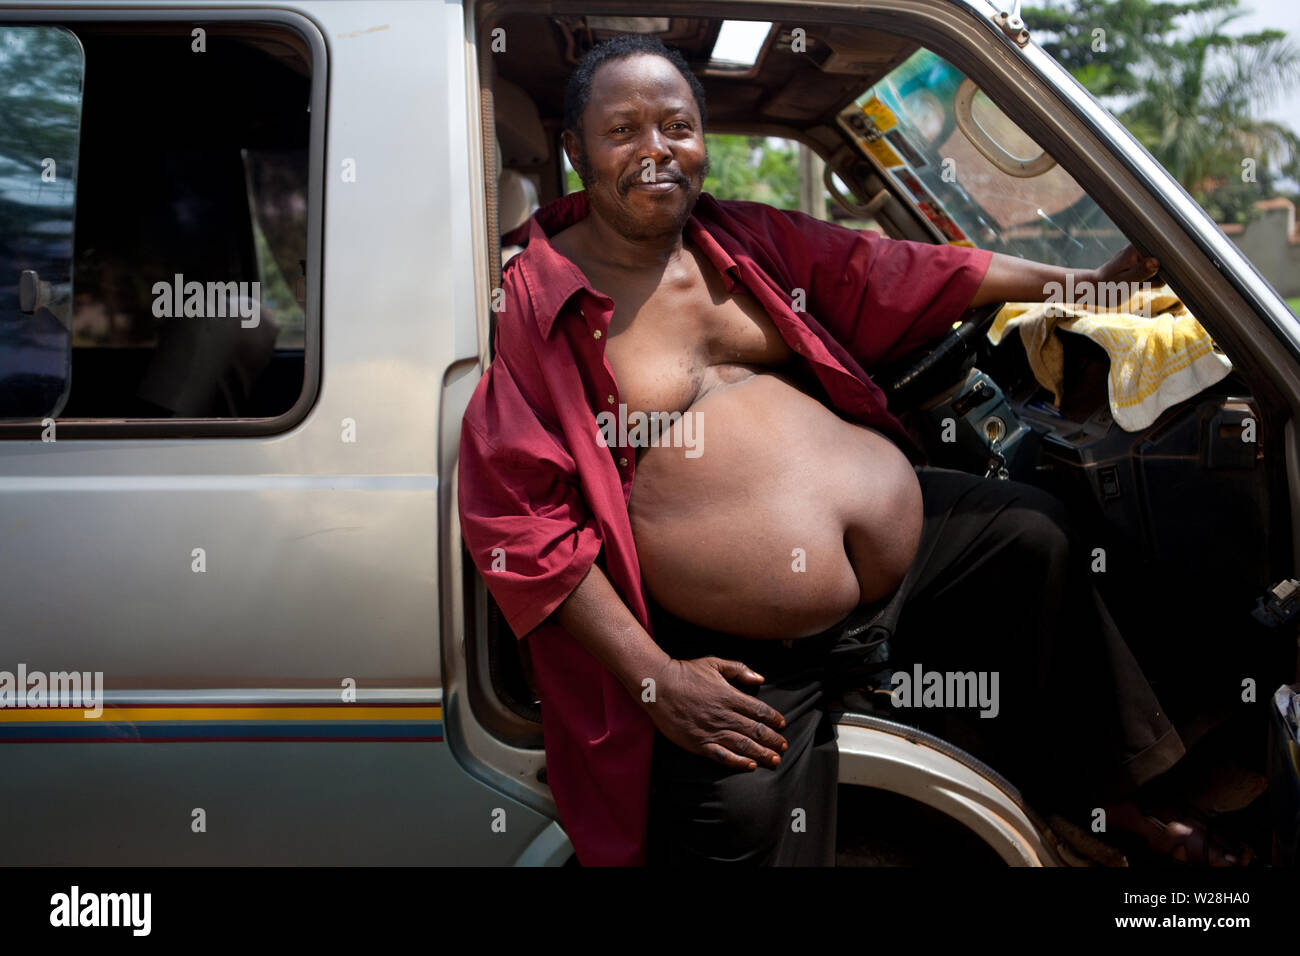 July 2, 2011 – Kampala, Uganda - Moses Kawooya is a 59-year-old obese Ugandan man. He weighs 110 kilos. Kawooya is a dancer and the chairman of the group Sanyu African Music and Dramatic Society (SAMADS). Ugandan President Yoweri Museveni calls him to perform whenever he hosts foreign Presidents such as US Presidents Bill Clinton and George Bush, Nigerian President Olusegun Obasanjo and Rwandan President Paul Kagame, ministers and other dignitaries in Uganda.  Kawooya says his big belly is genetic. His dad and his grandfather had the same physique. He takes pride in his enormous belly, saying Stock Photo